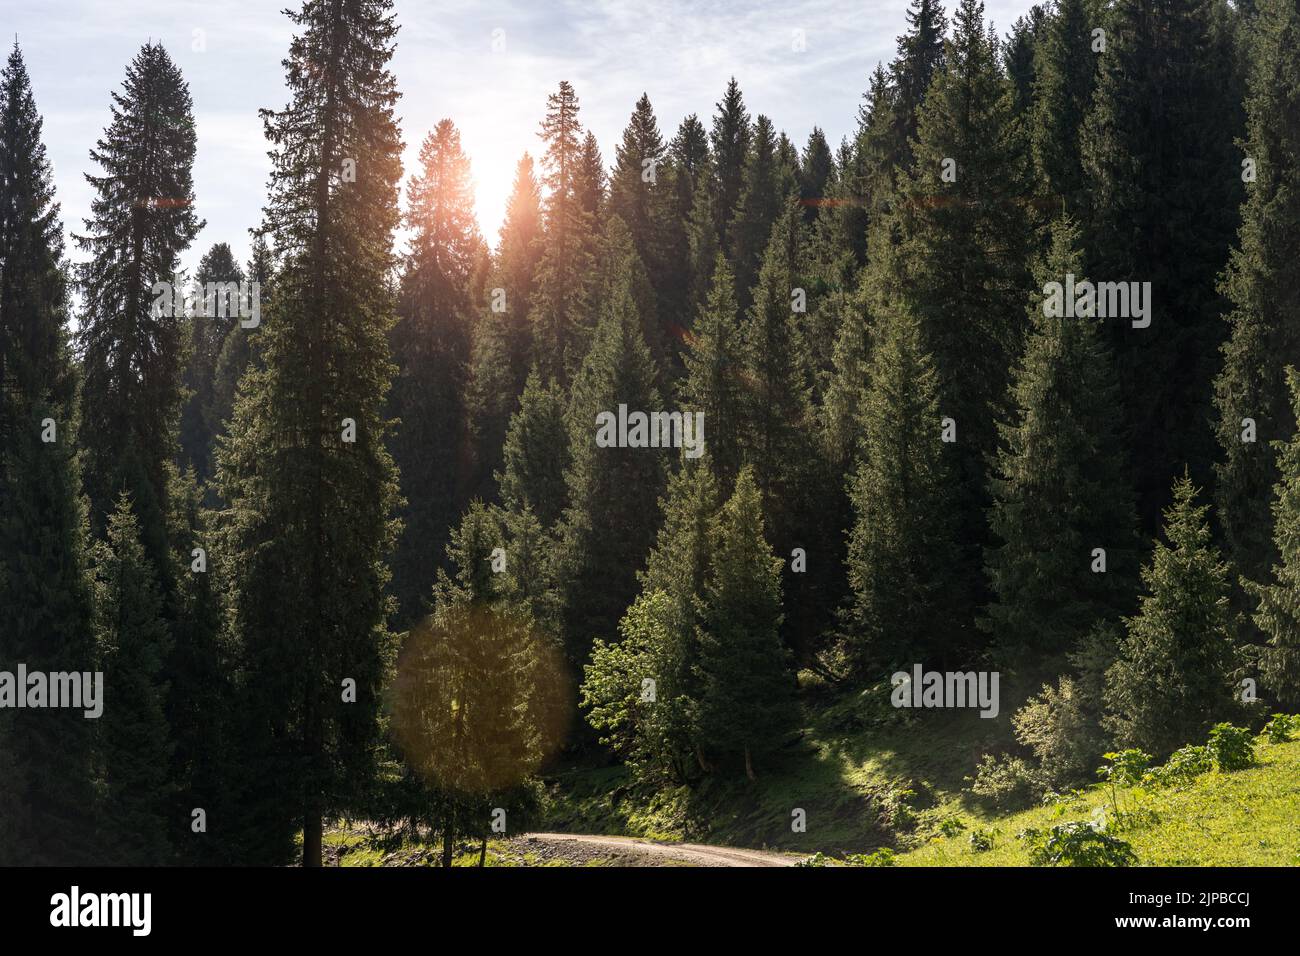 A shining sun behind the pine trees in the forest Stock Photo